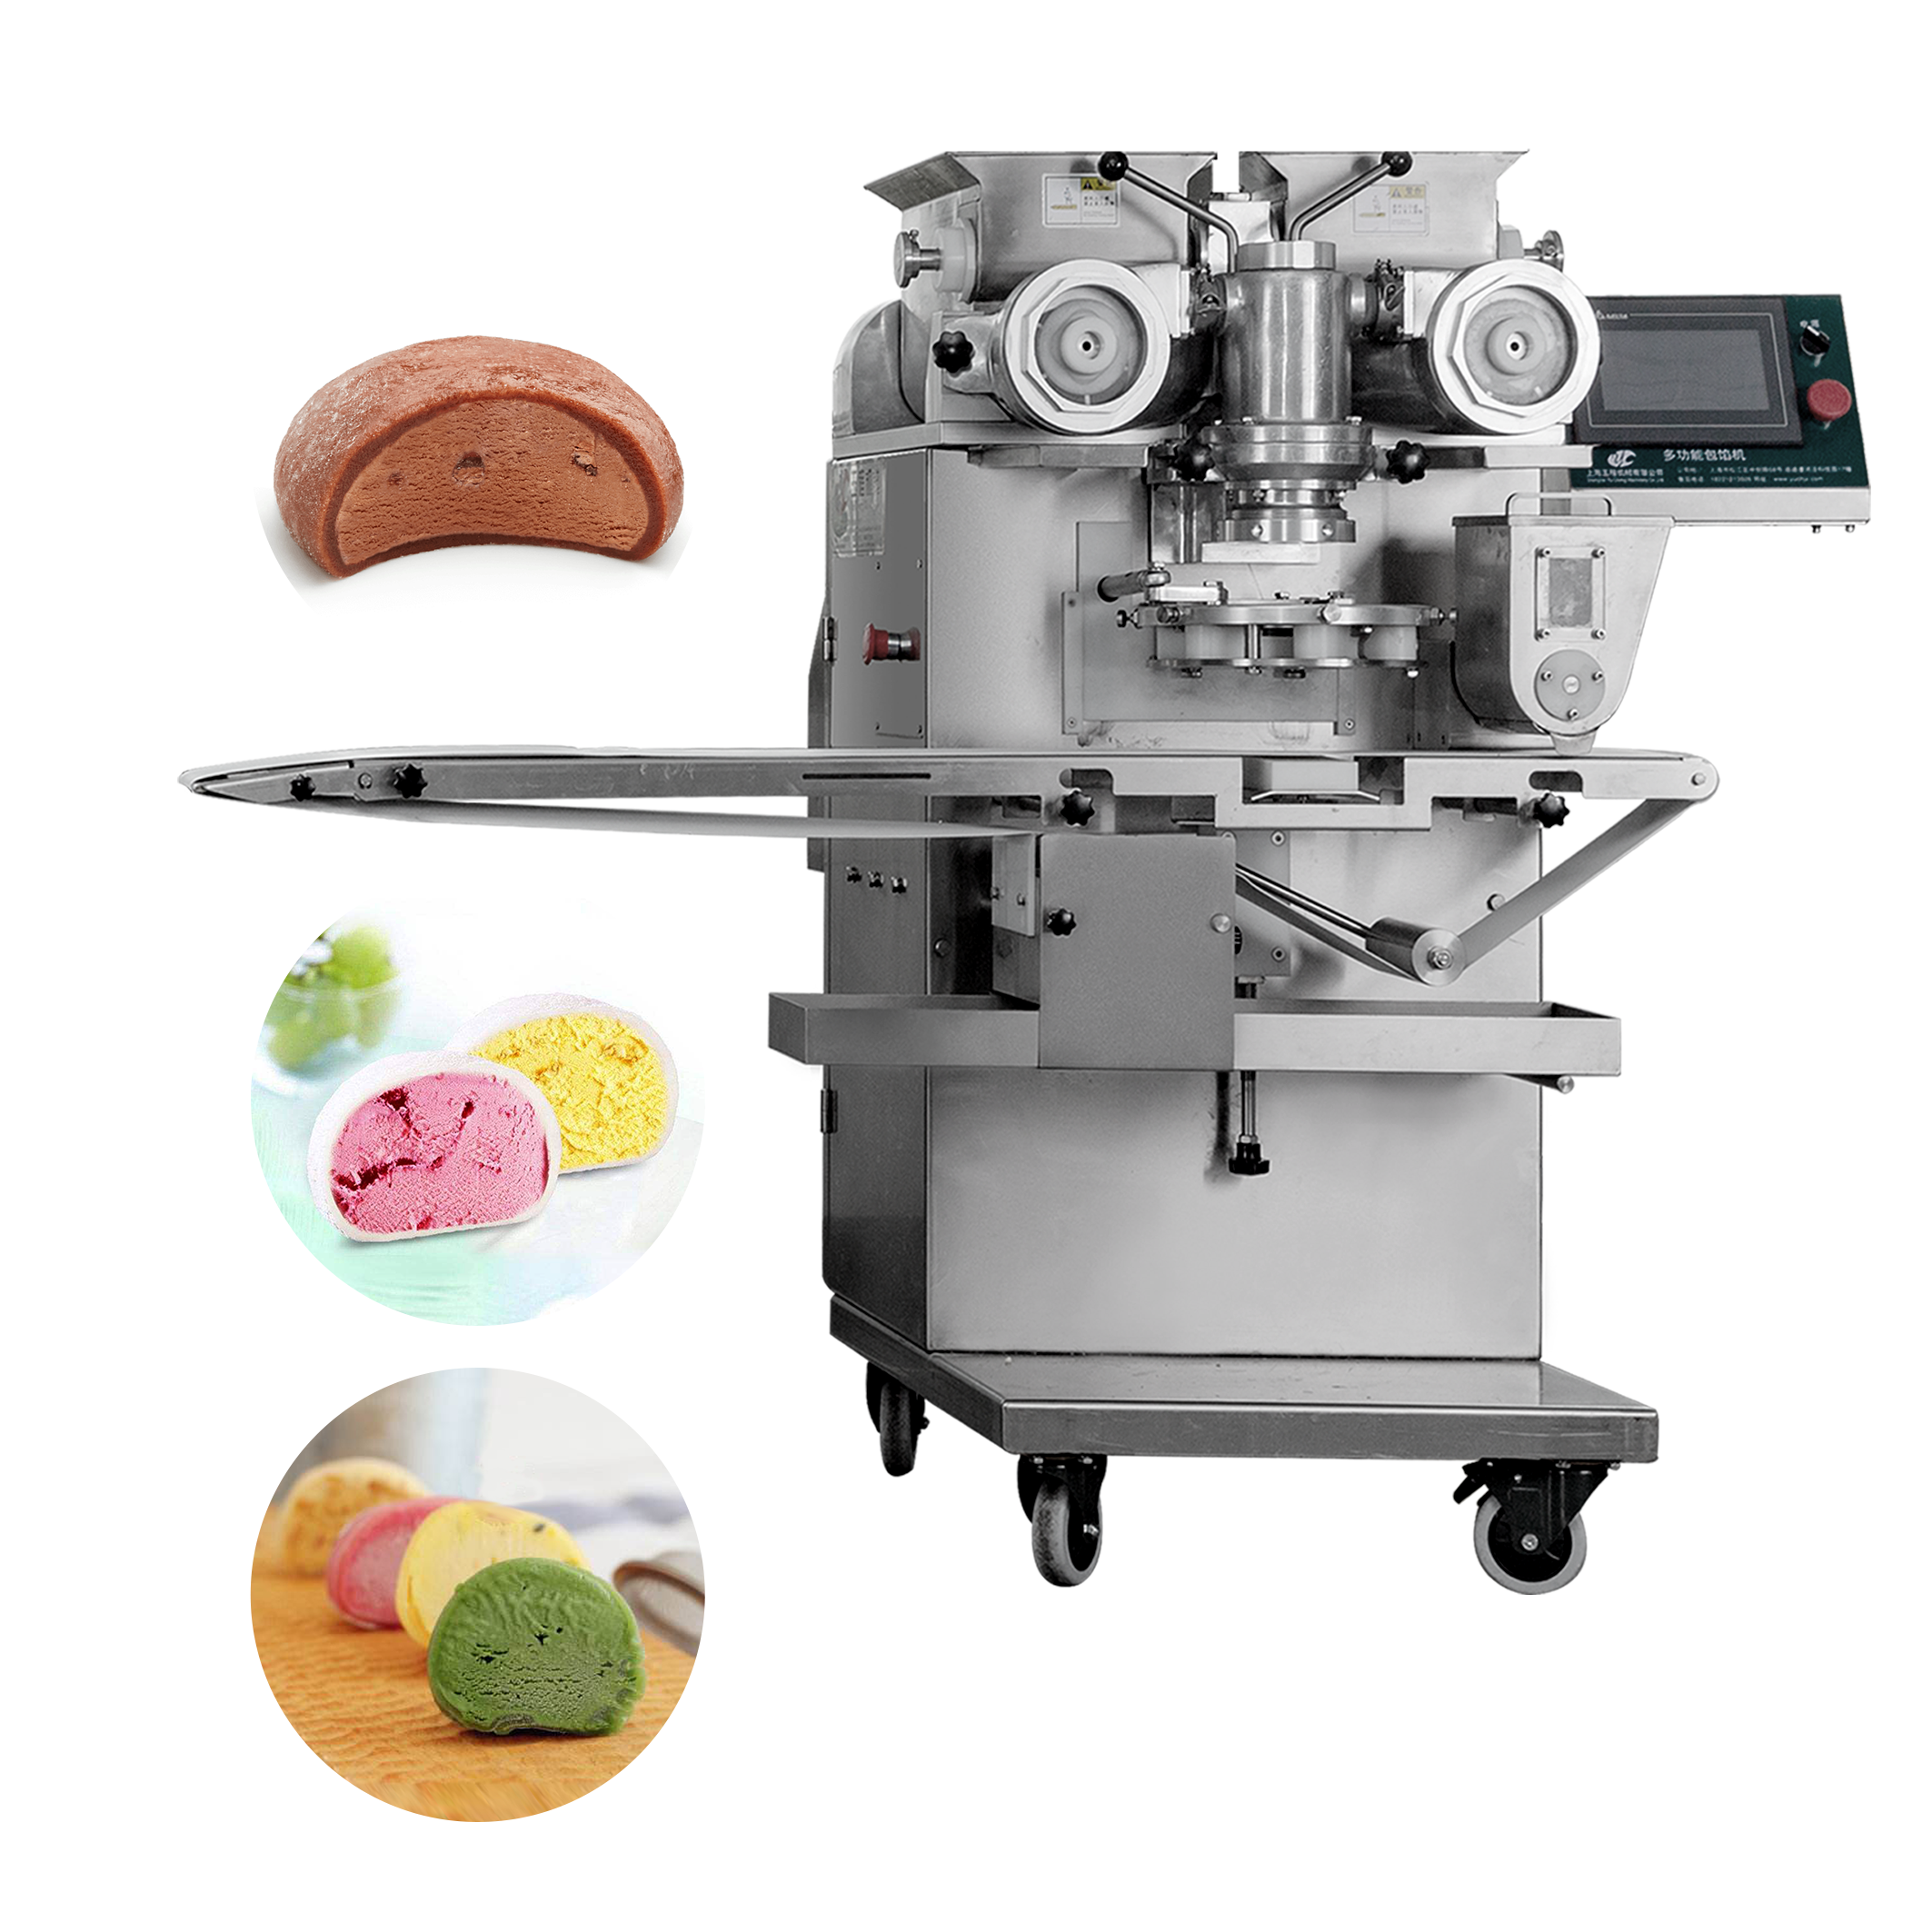 Super Purchasing for Falafel Machine Usa - High Speed 304 Stainless Steel Material YC-168 Ice Cream Mochi Mchine – Yucheng